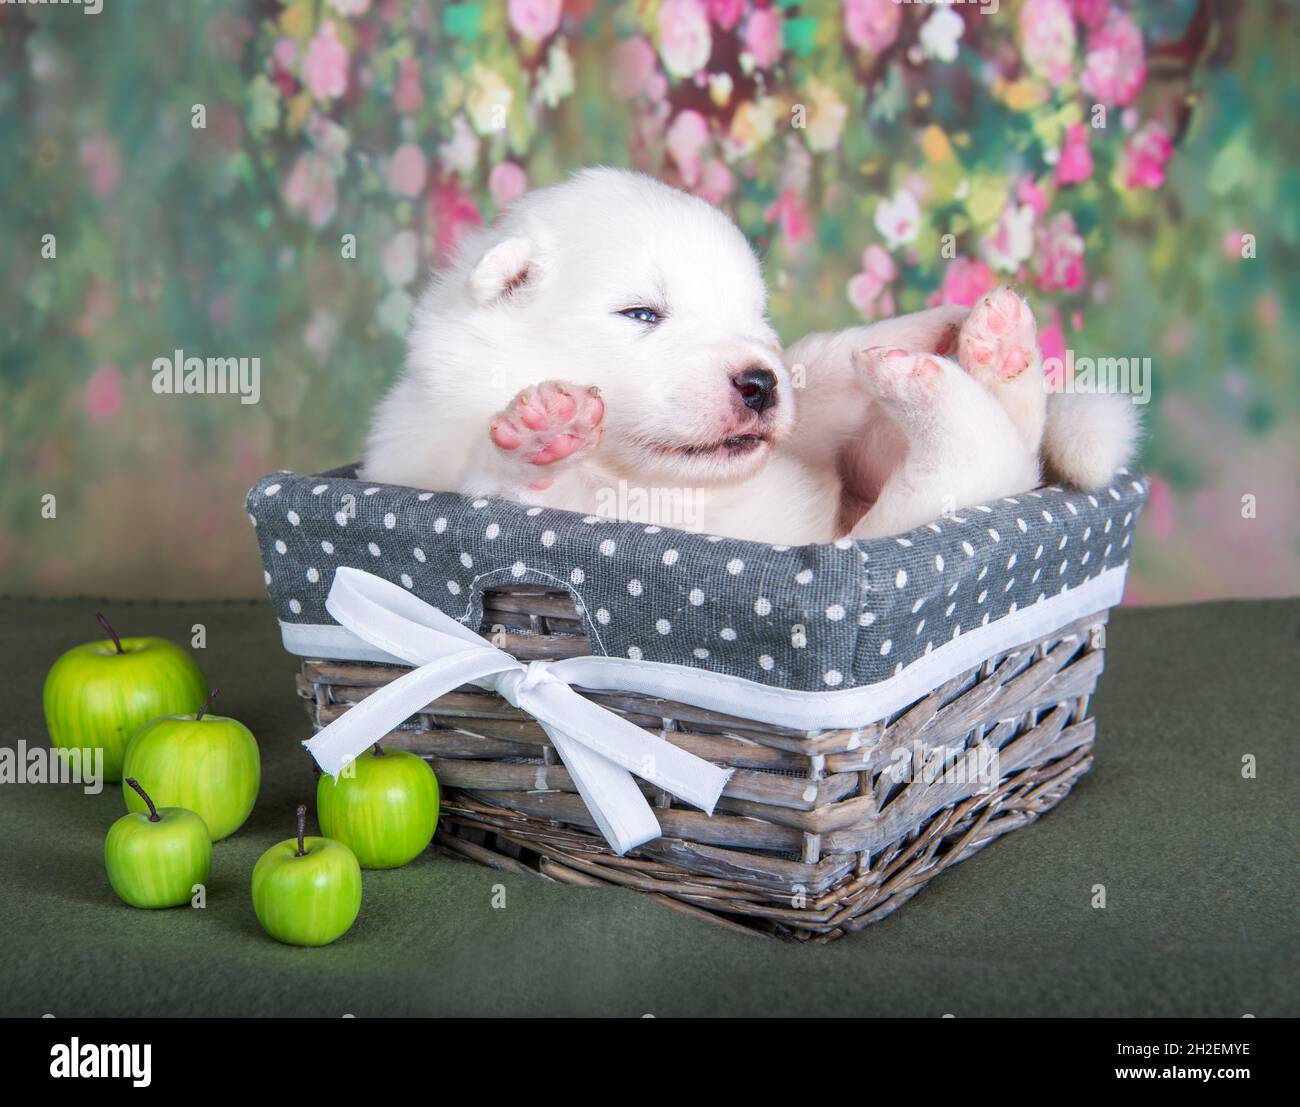 White fluffy small Samoyed puppy dog in a basket with apples Stock Photo